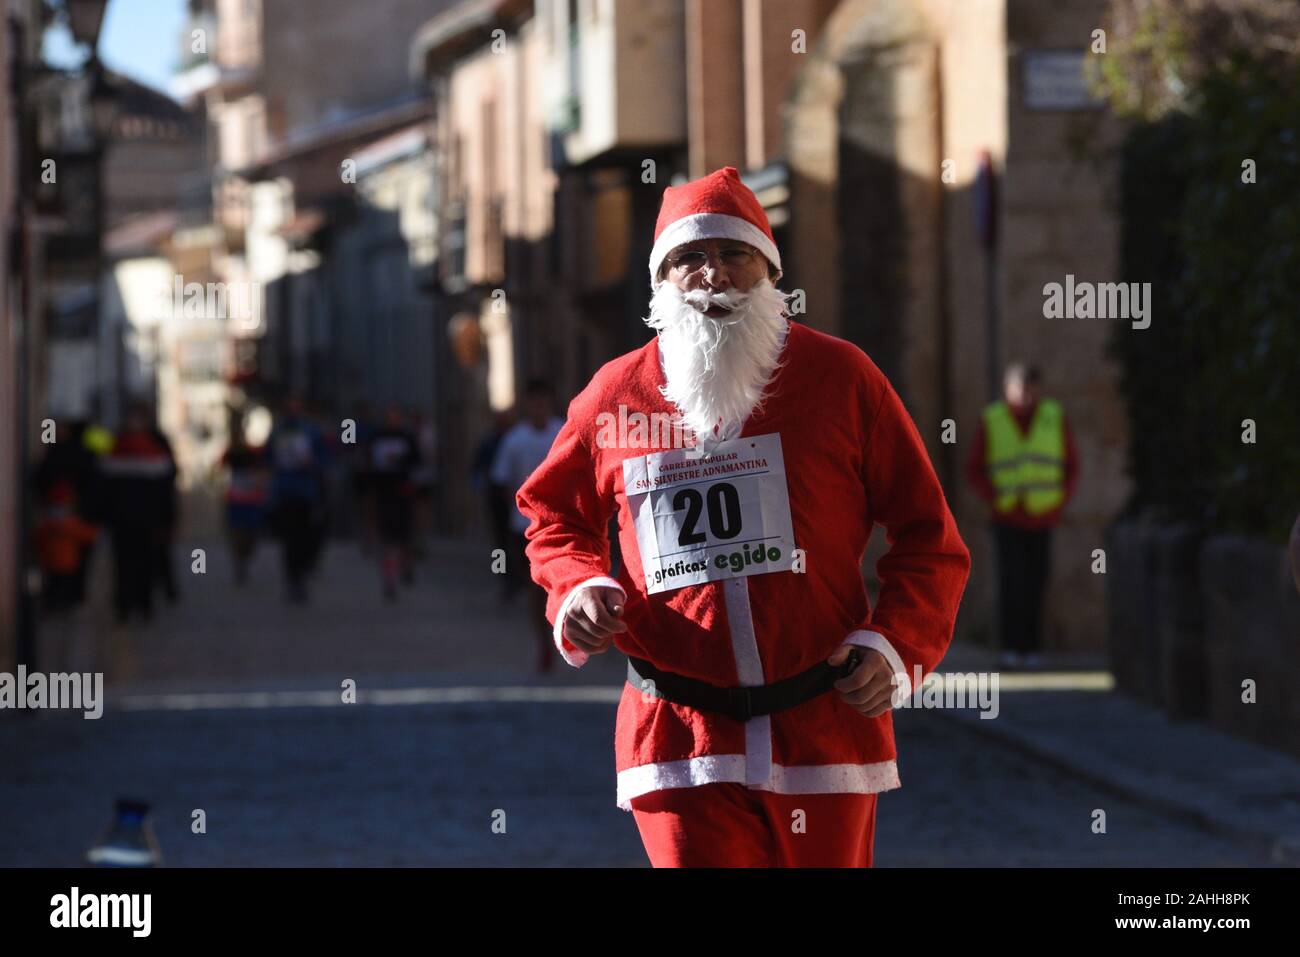 A man dressed as Santa Claus takes part during the race.During the last days of the year, hundreds of Spanish towns and cities celebrate popular races called San Silvestre. The most famous, known as San Silvestre Vallecana, will be celebrated next Tuesday, 31 December in Madrid. Stock Photo